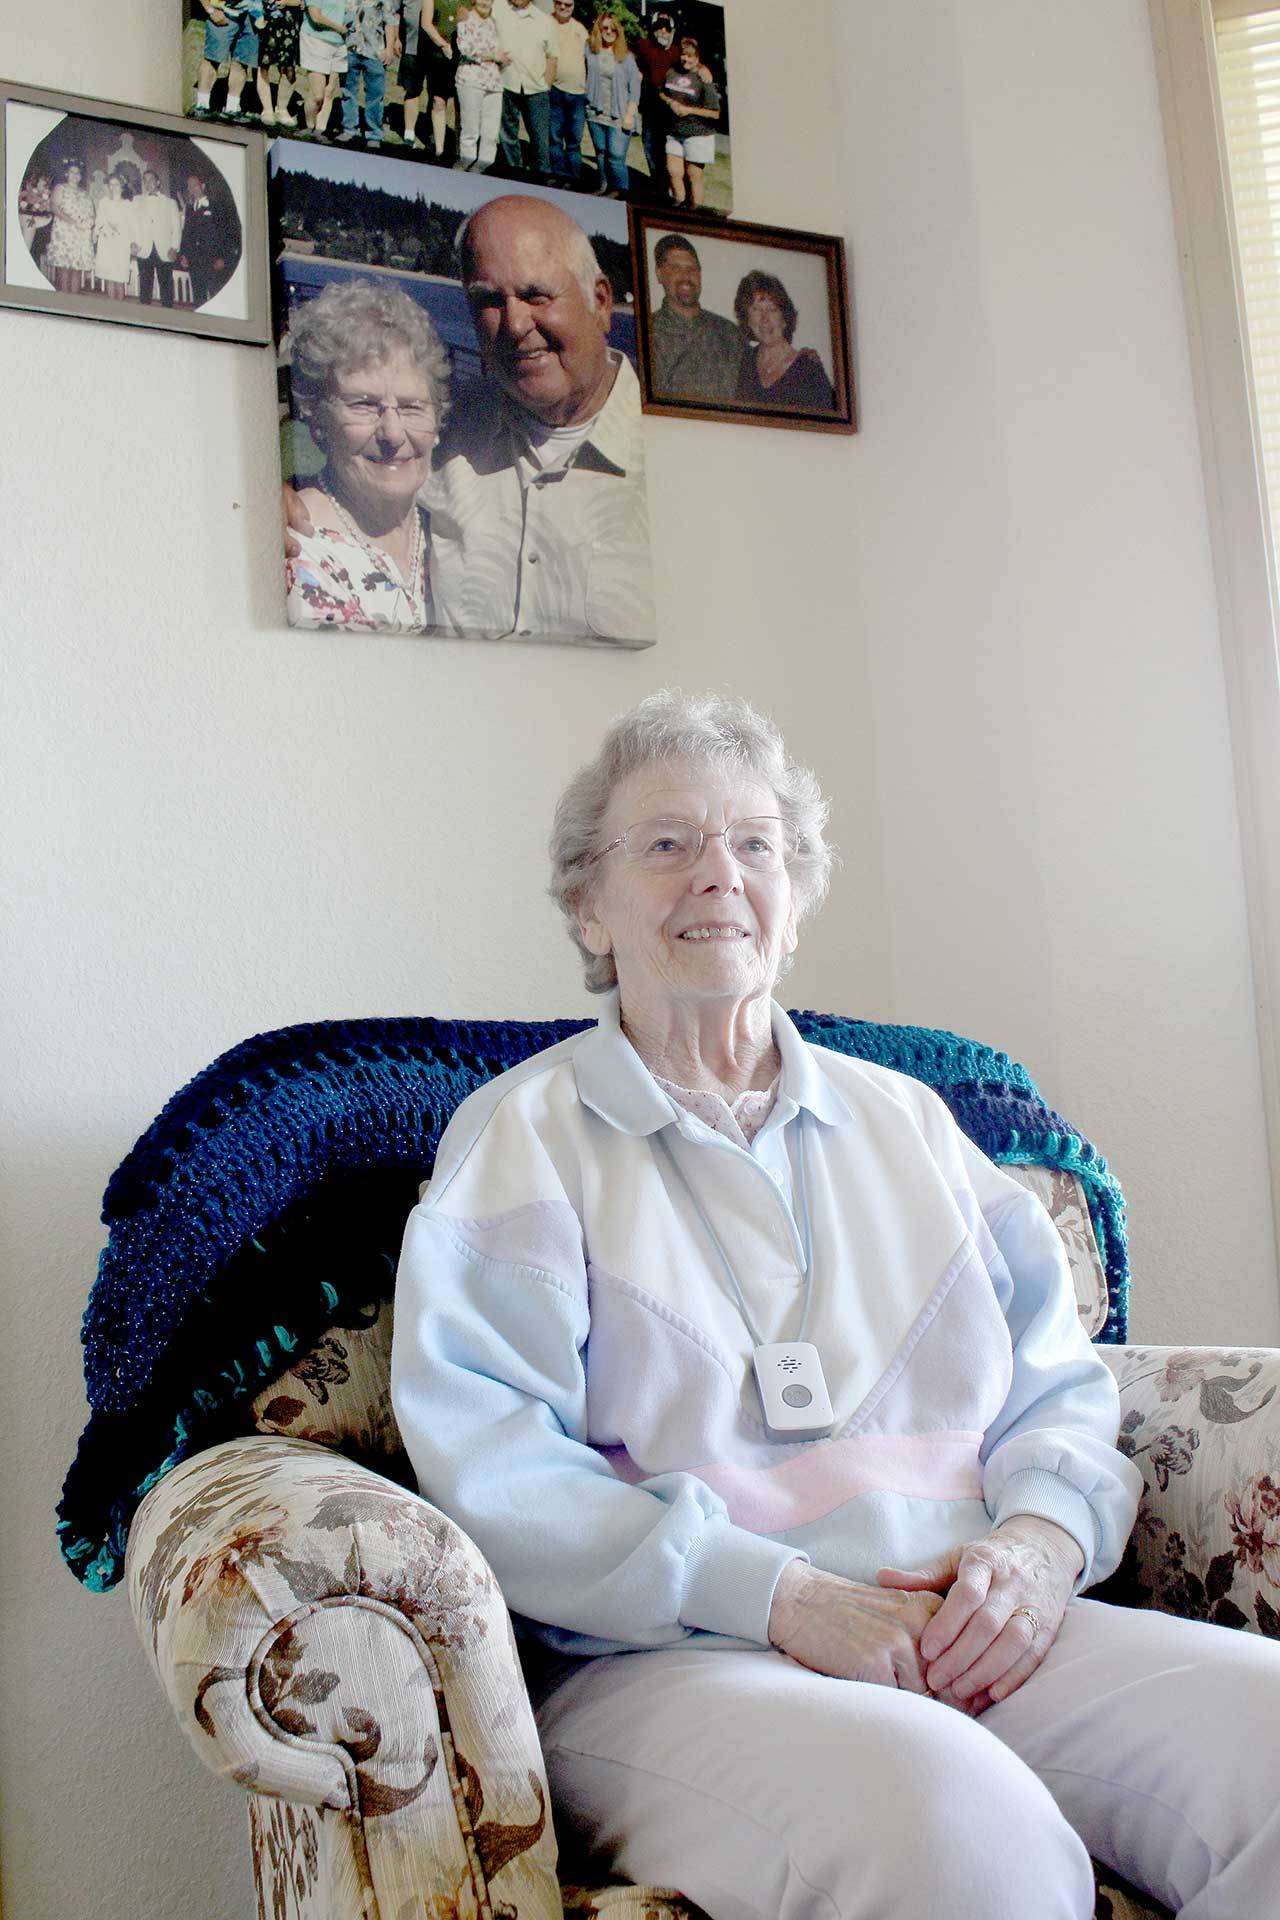 Delores Hagerman, 83, of Port Ludlow will benefit from a trust fund created for asbestos poisoning victims, such as her late husband Ken, derived from insulation made by Owens-Illinois Inc between 1948 and 1958. (Zach Jablonski/Peninsula Daily News)